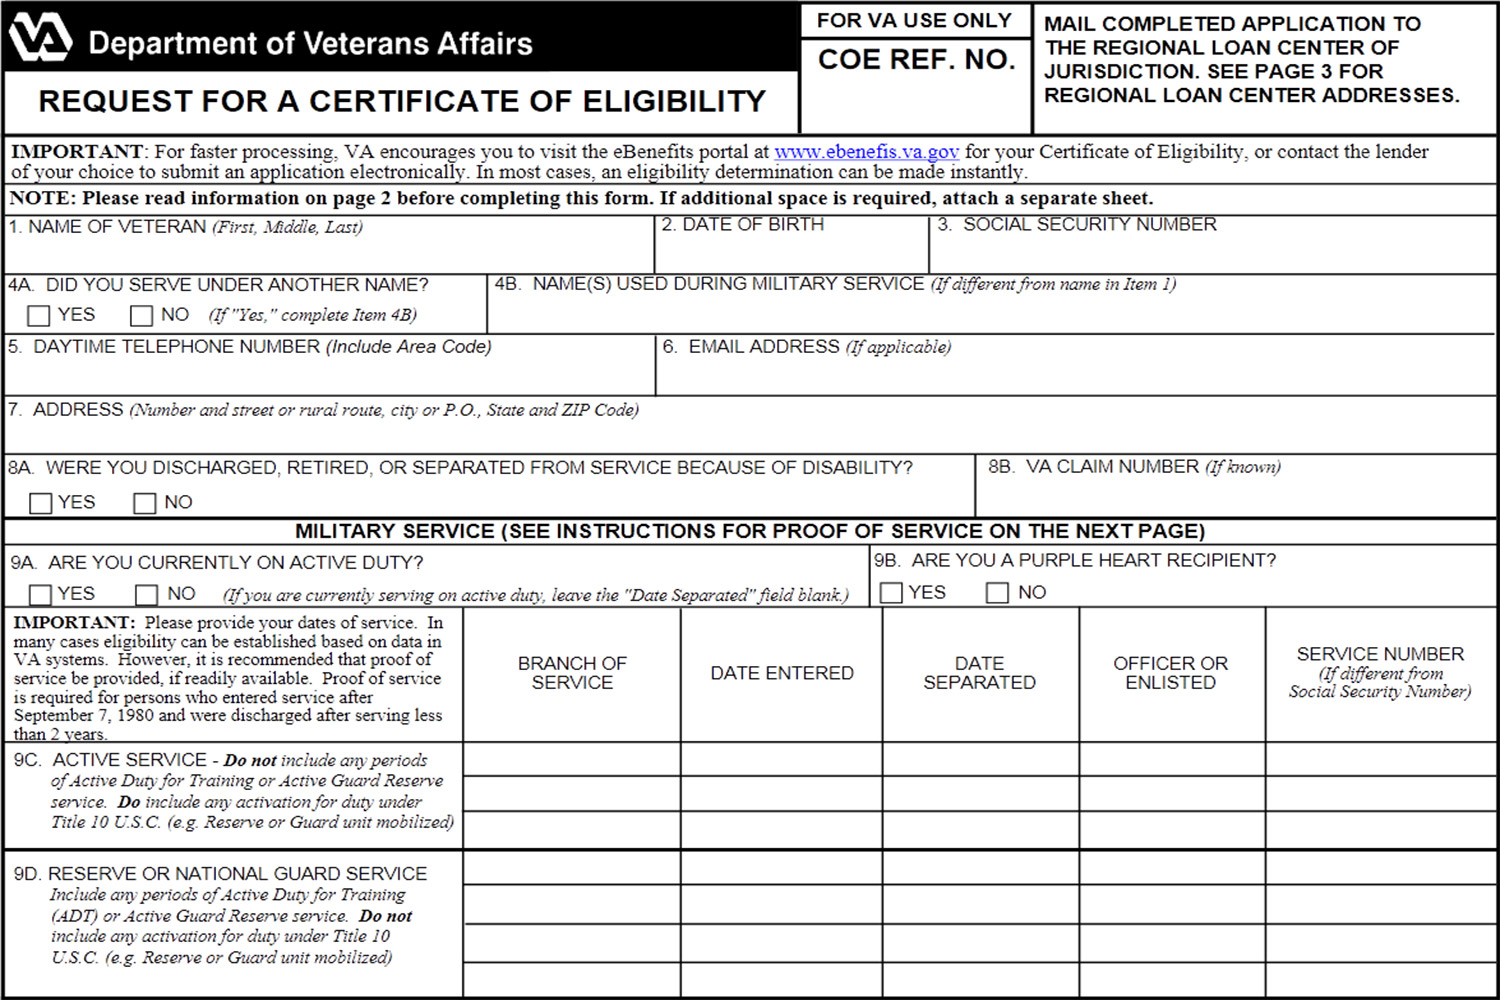 Getting Your VA Certificate of Eligibility Everything You Need to Know